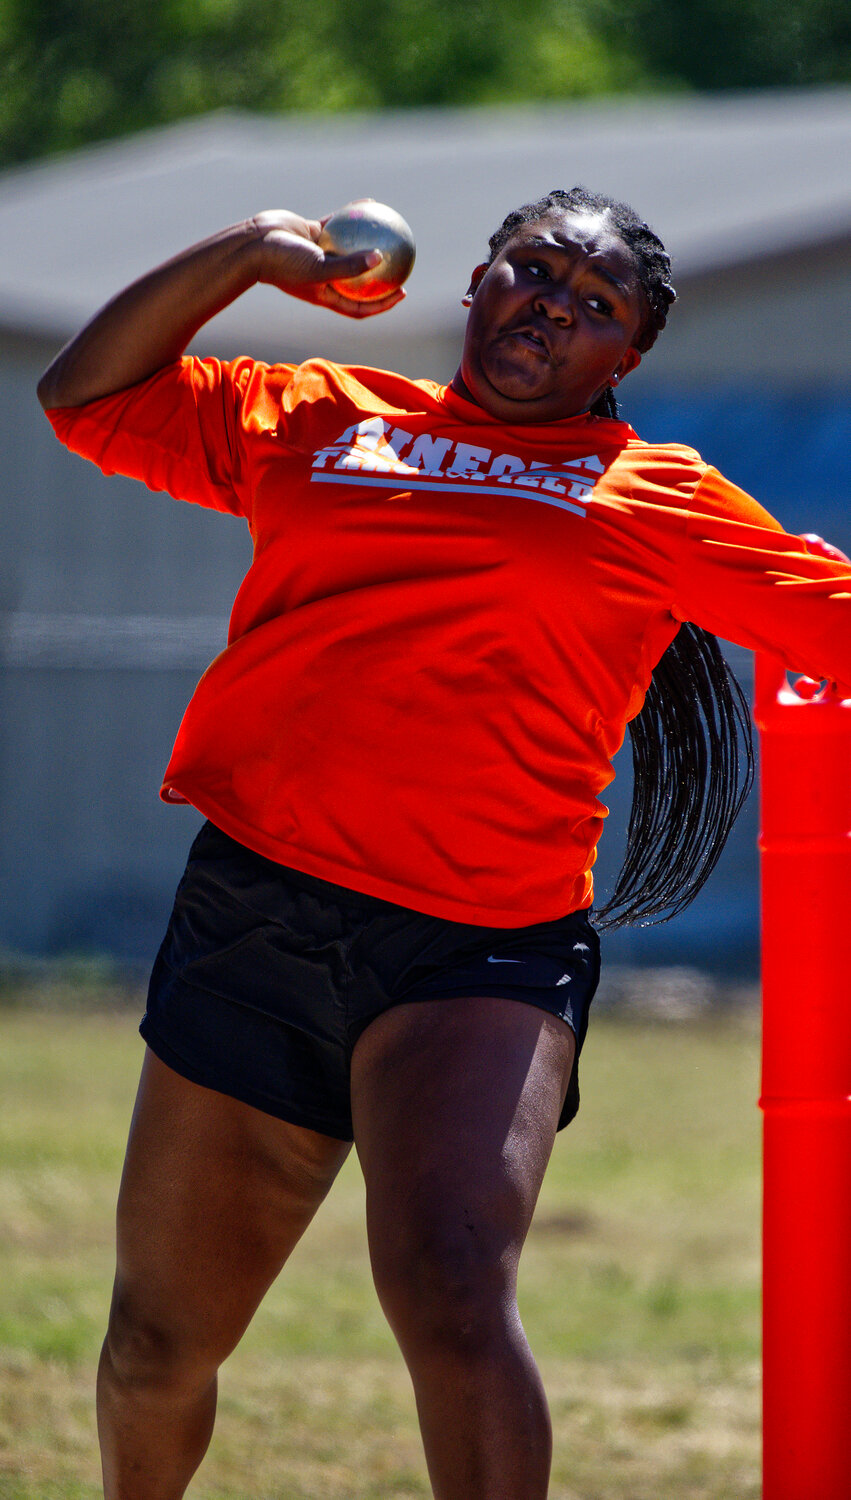 Zion Oladjide threw the shot 28'11" to nab a silver medal. She won the discus competition, topping the podium for a Mineola sweep with teammates Callie Black and Makena Quiambao. [see more speed and strength on display]